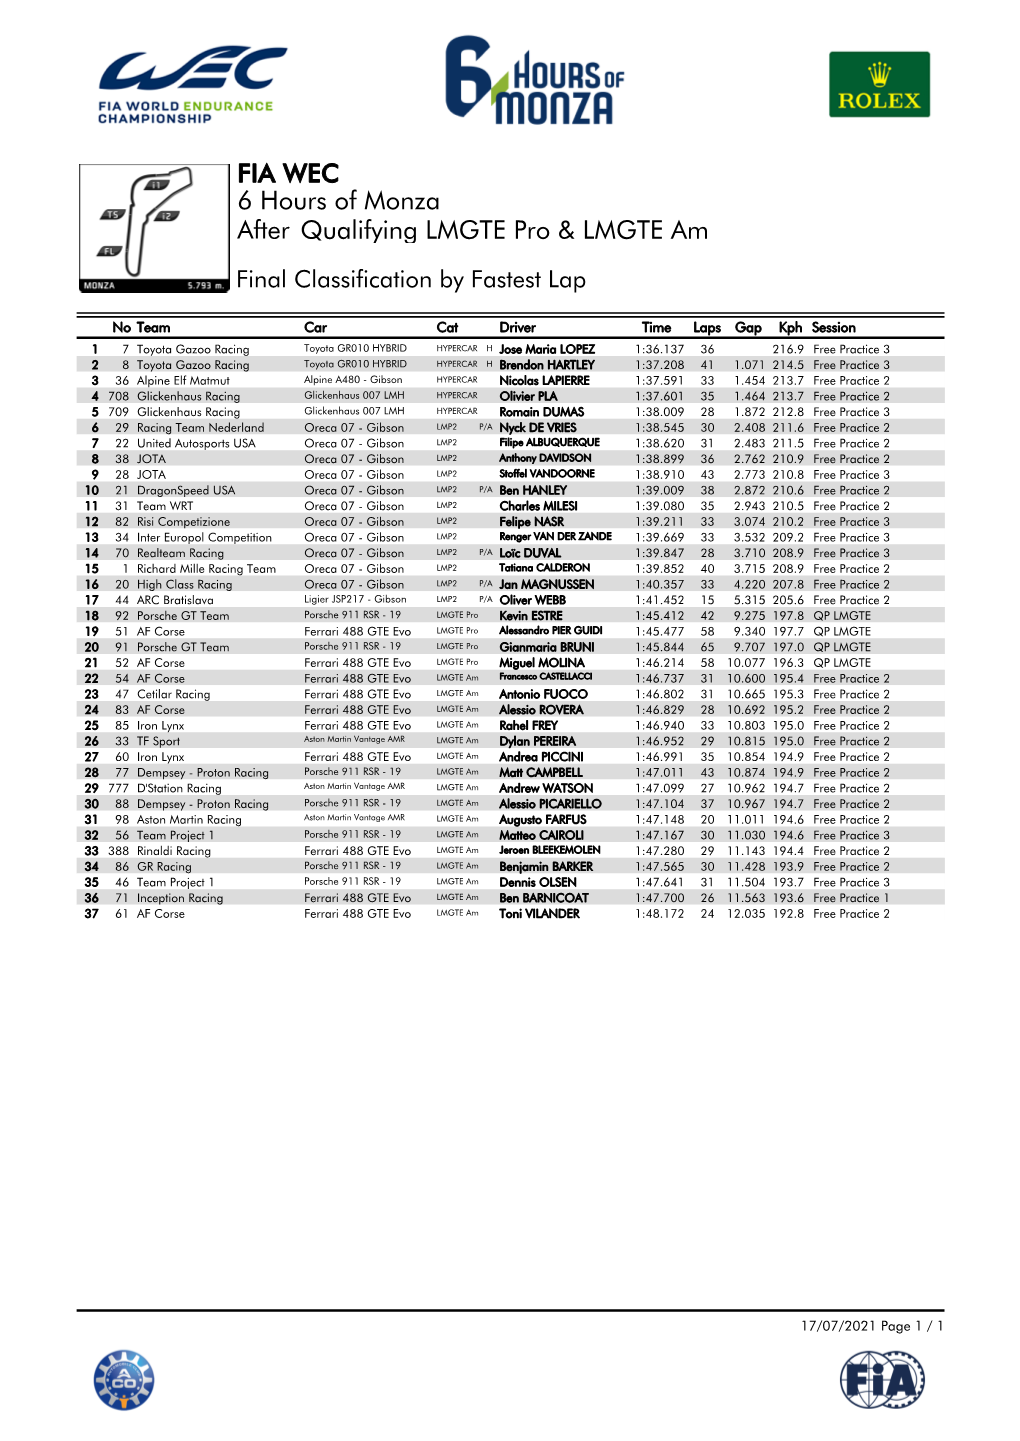 Qualifying LMGTE Pro & LMGTE Am 6 Hours of Monza FIA WEC After